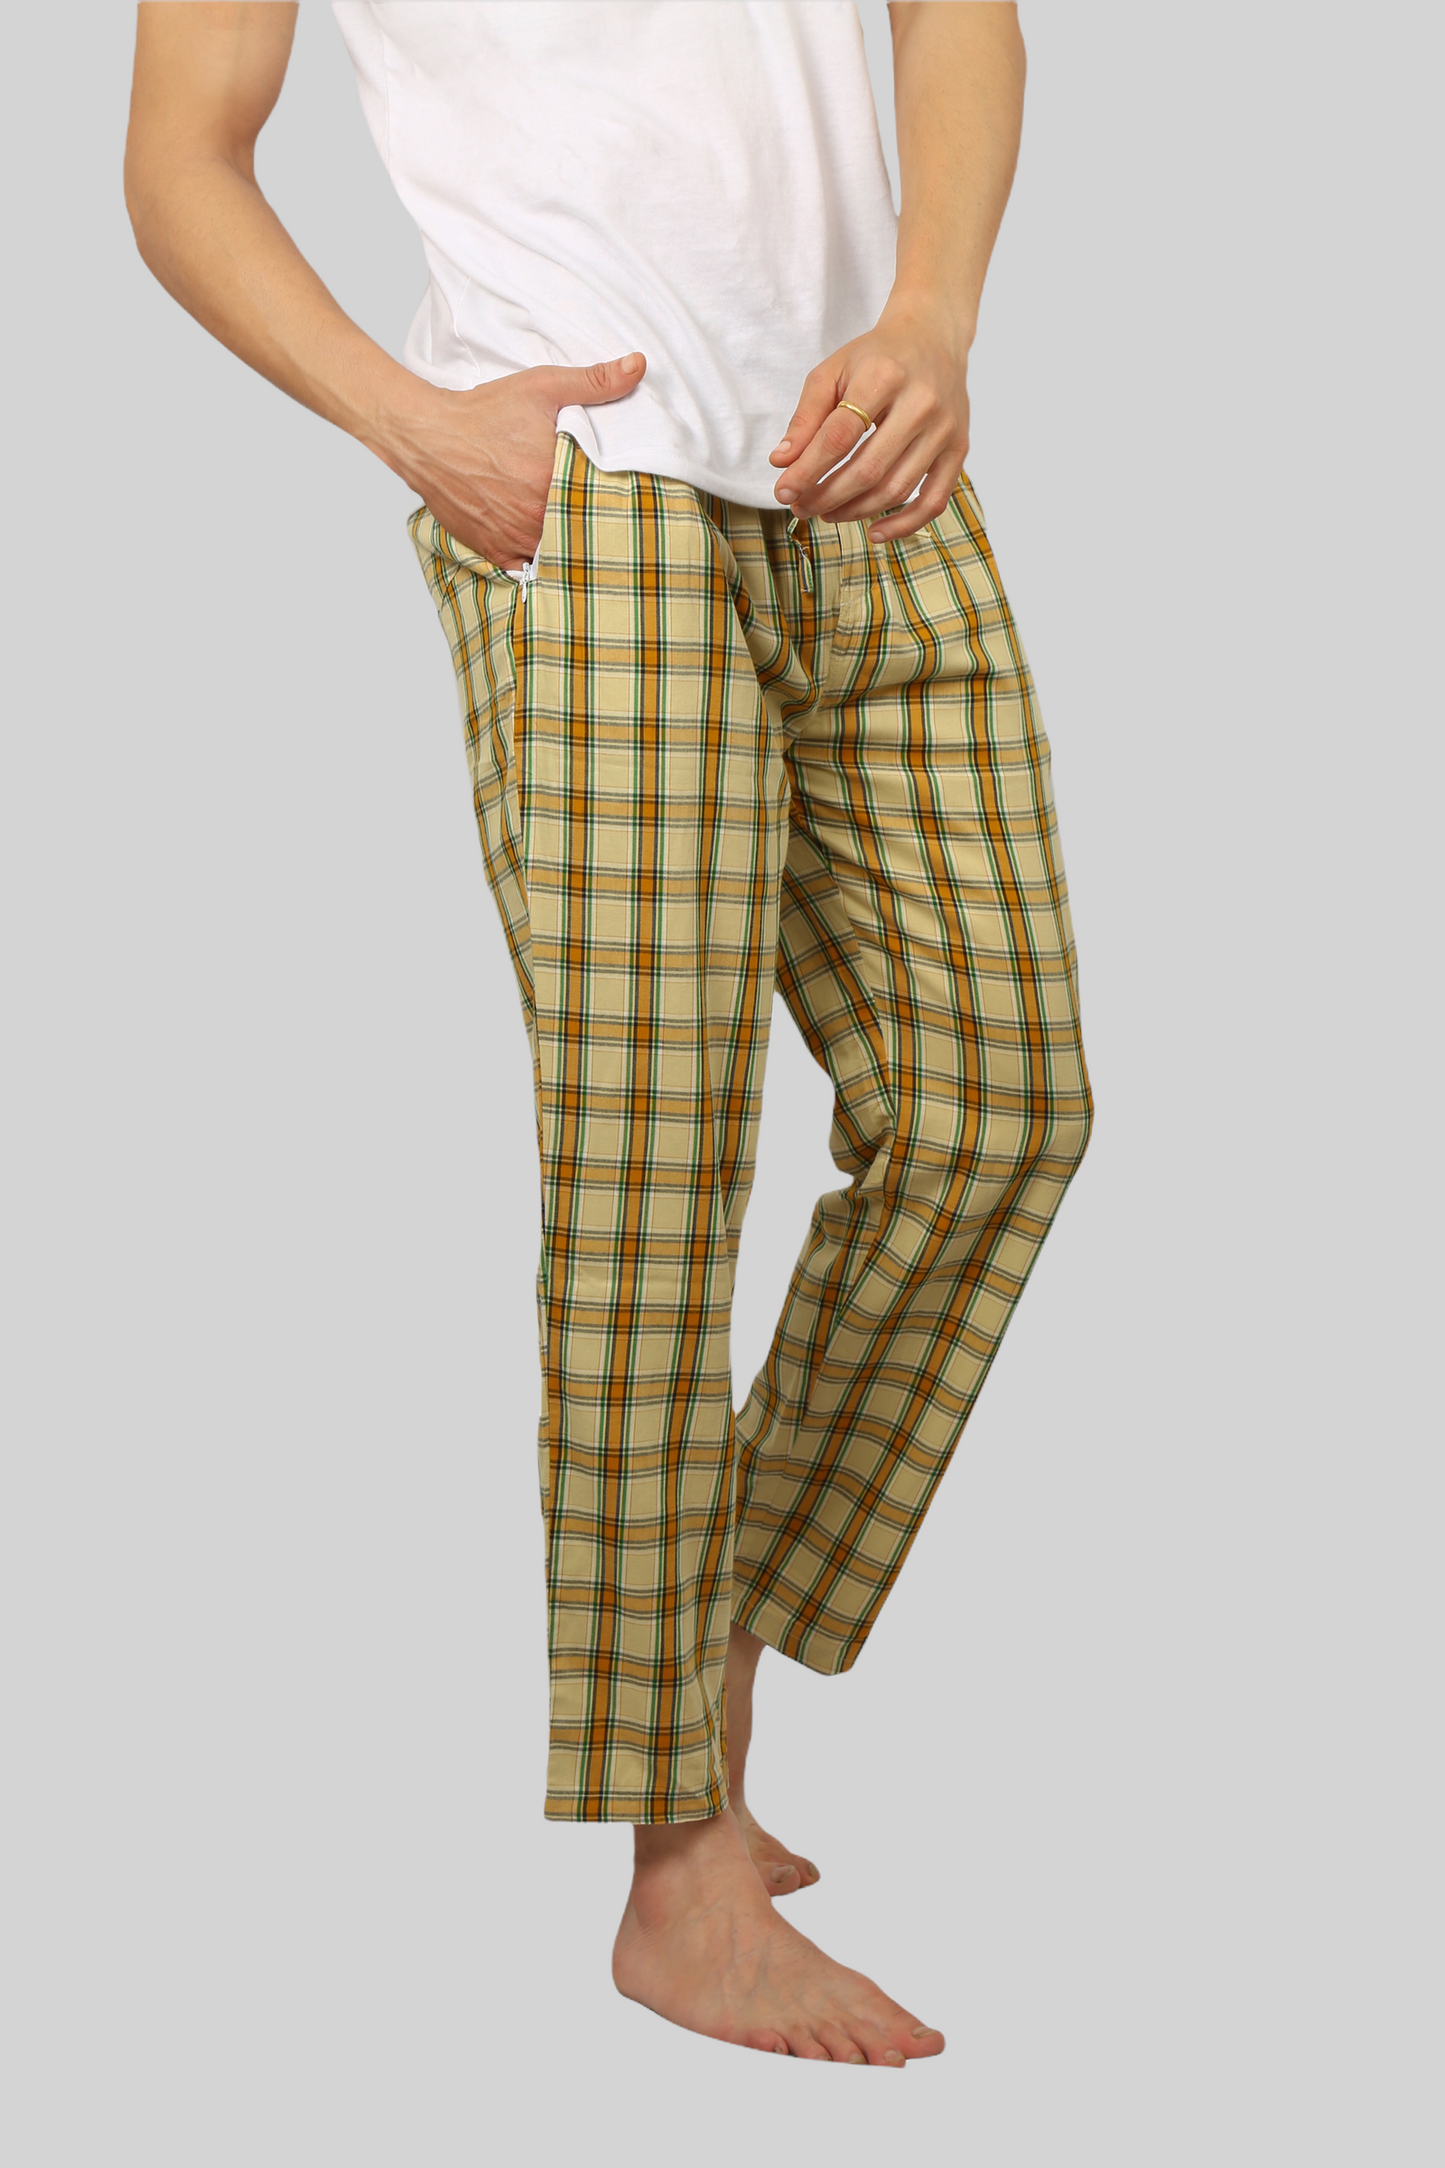 Beige soft and super comfortable checkered pajamas for men